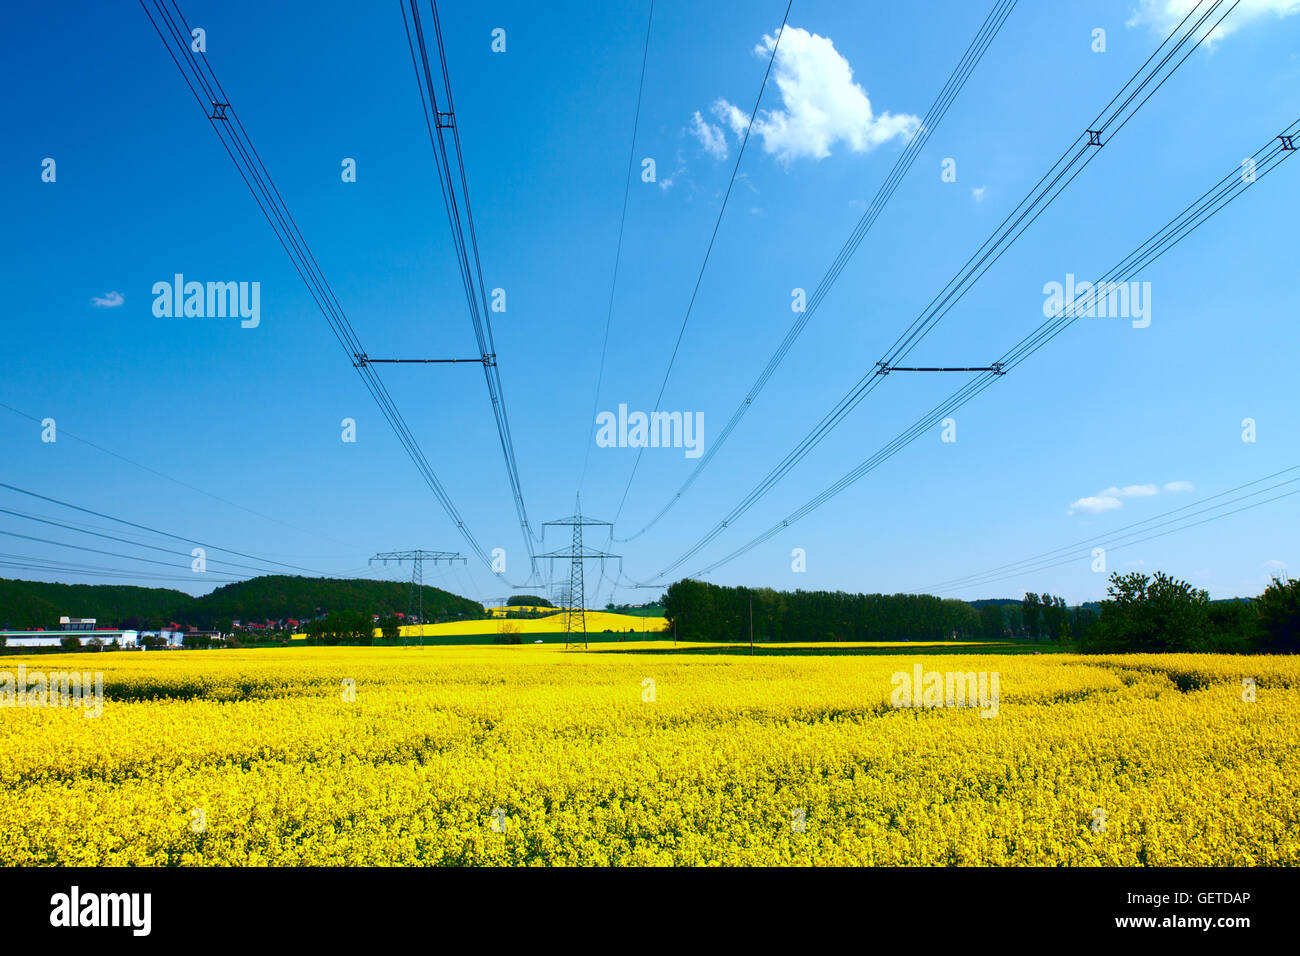 High voltage power lines over rapeseed field Stock Photo